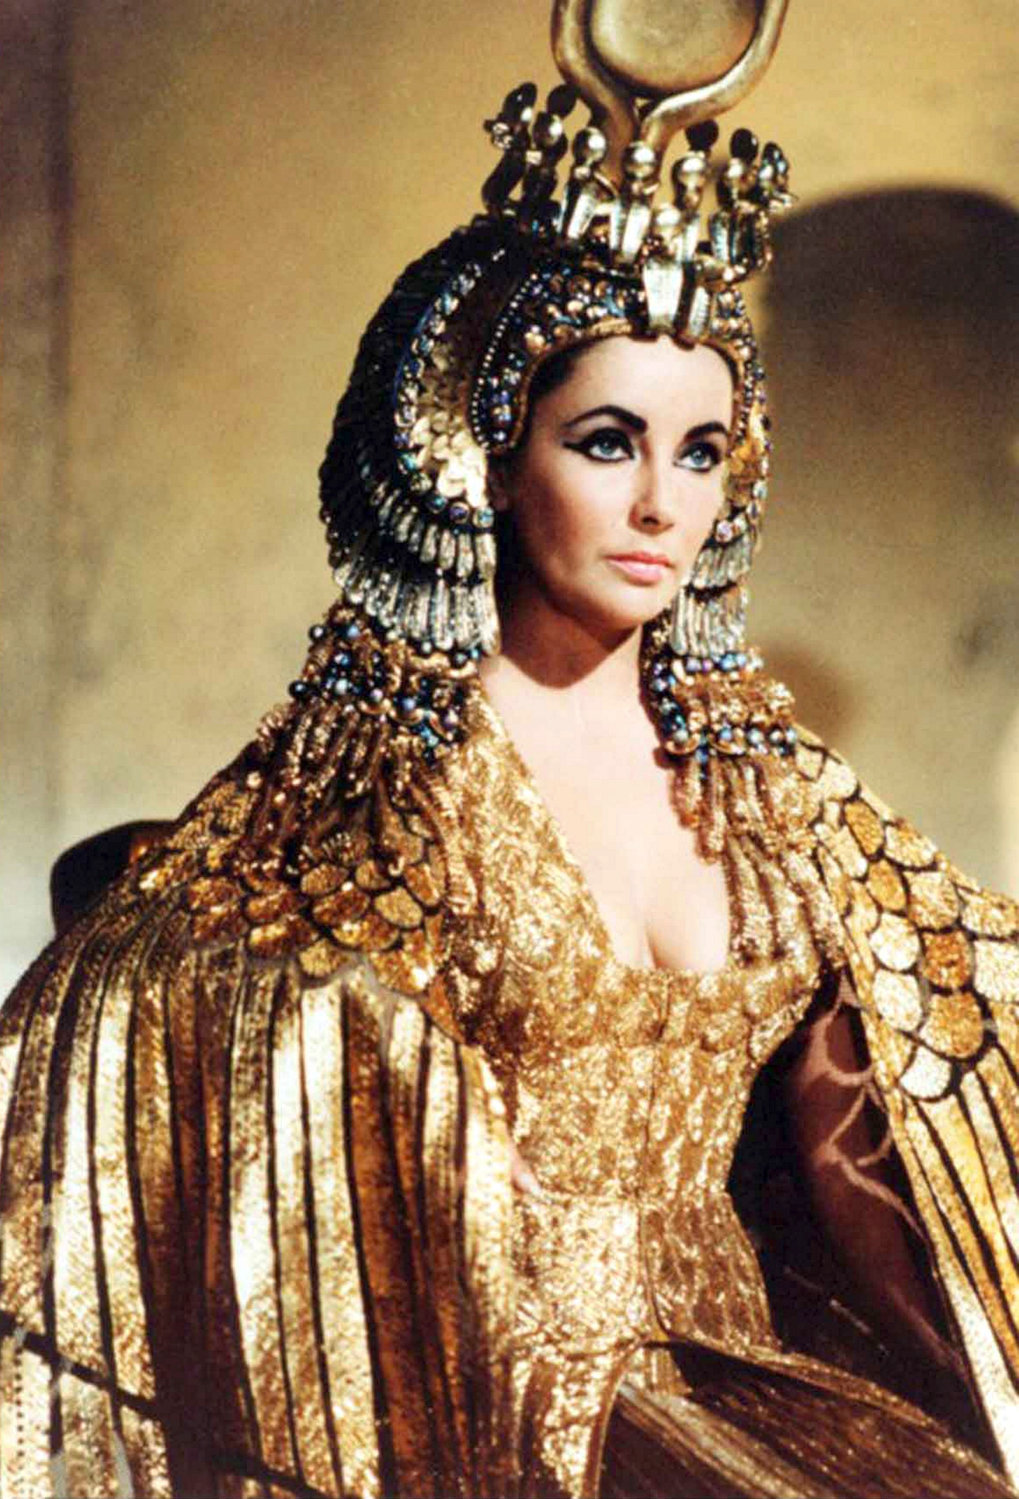 Elizabeth Taylor as Cleopatra in the 1963 epic drama film directed by Joseph L. Mankiewicz.